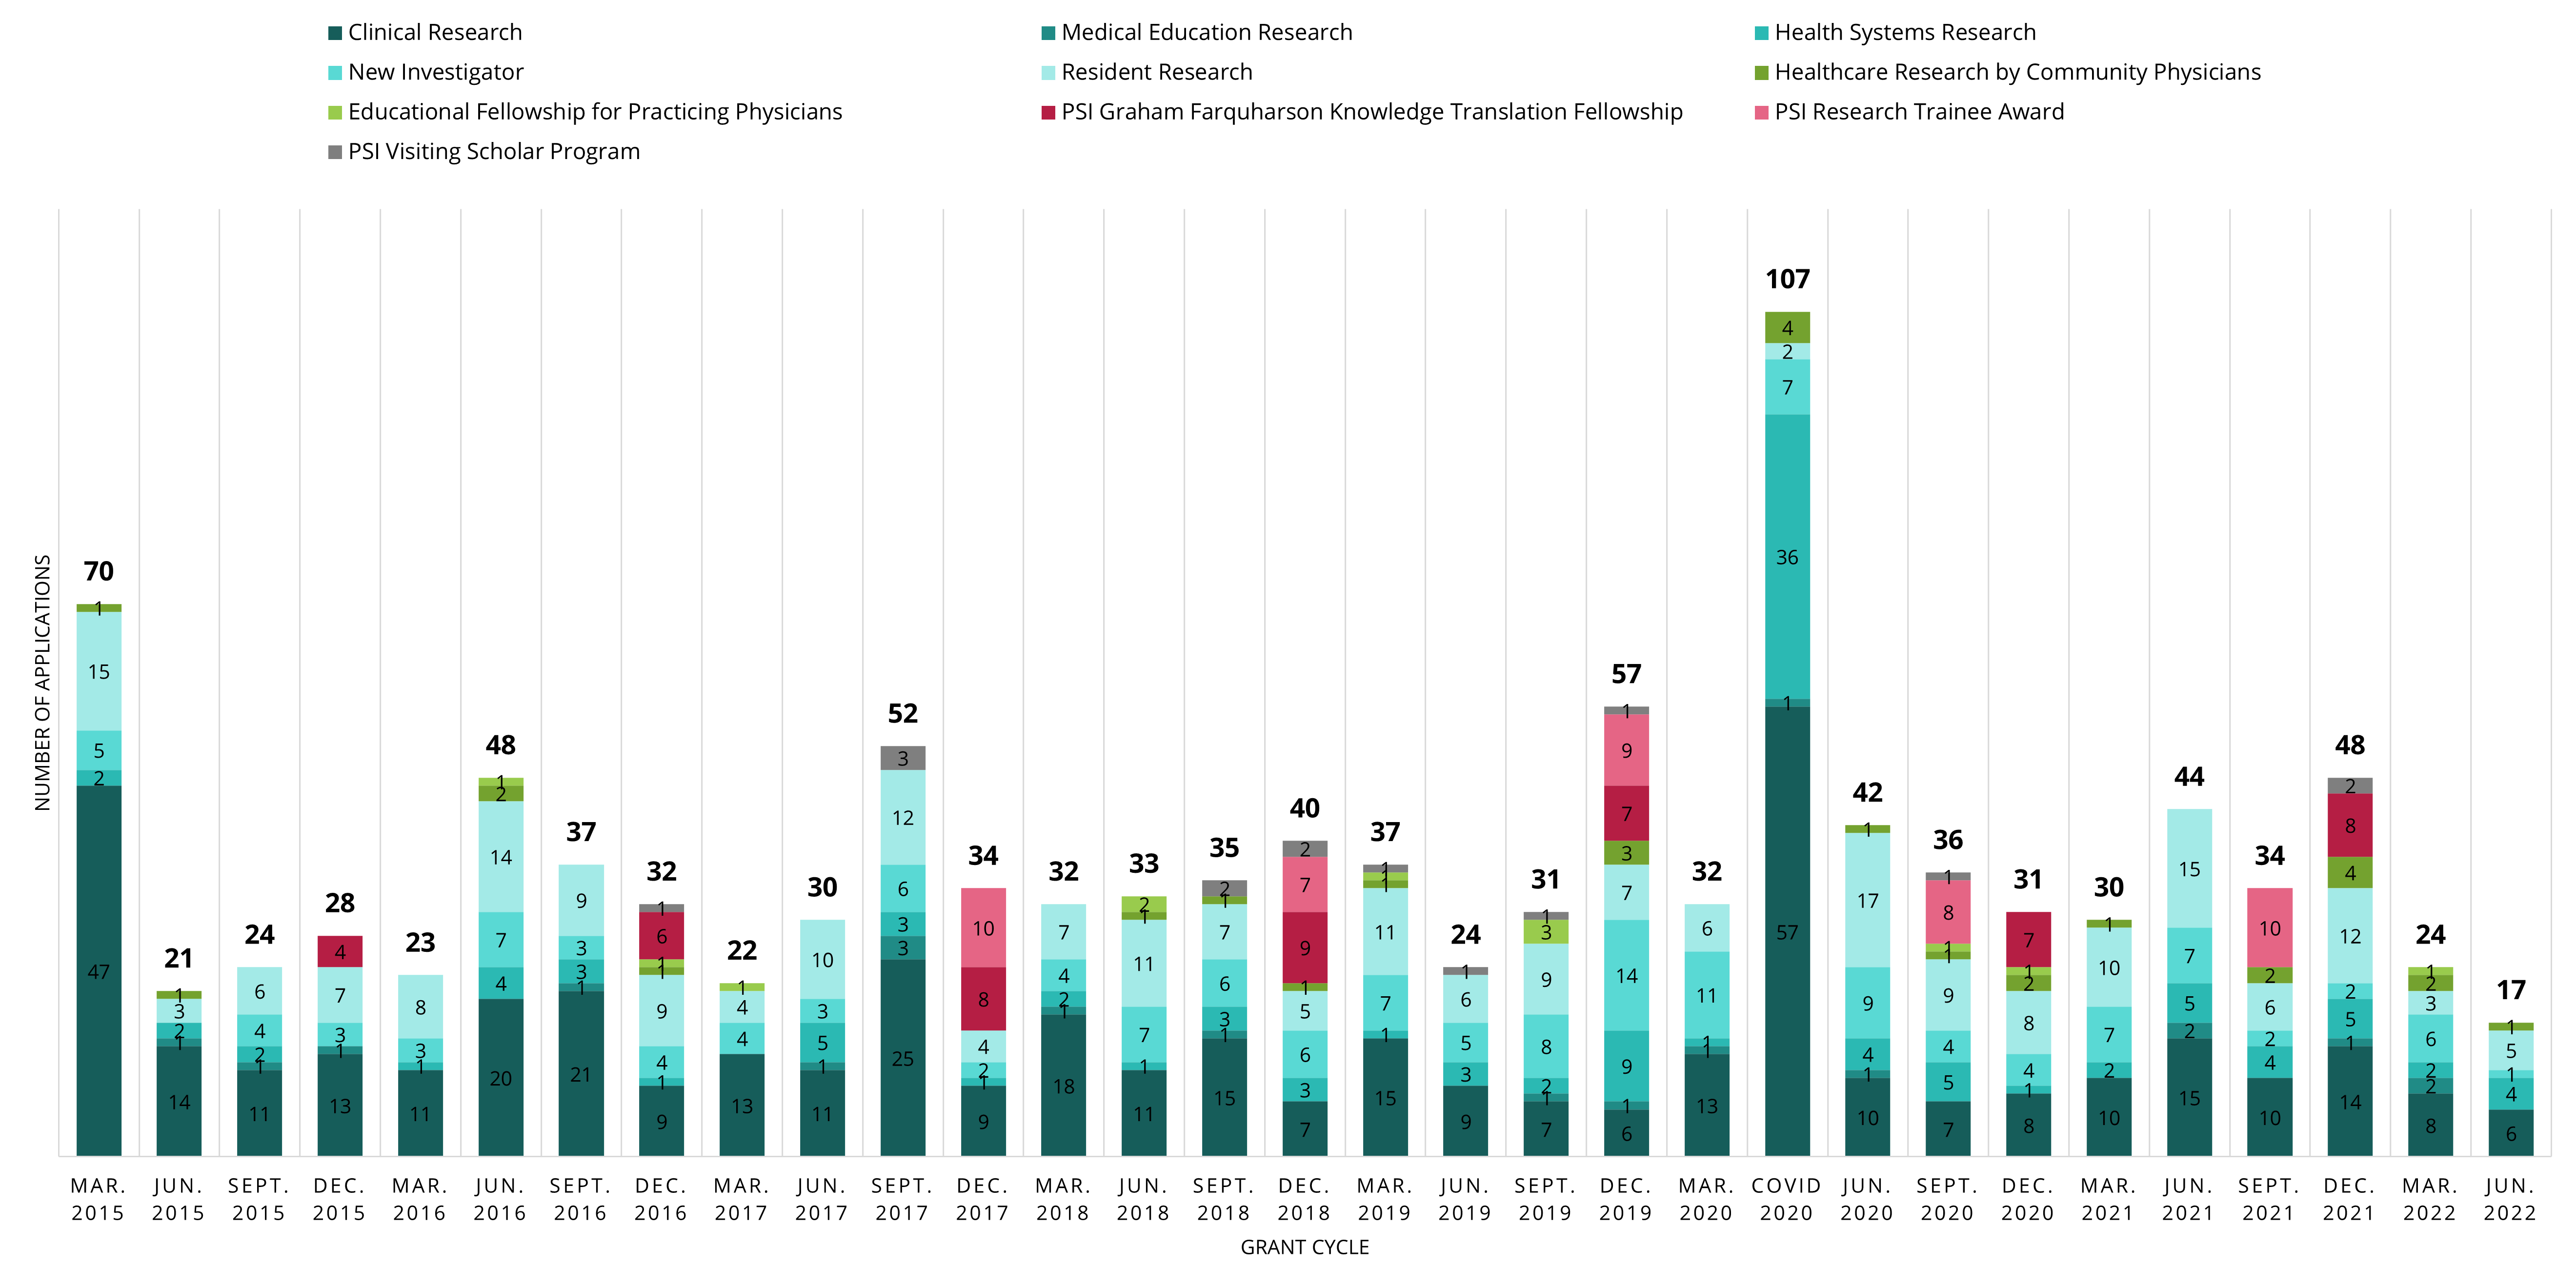 Number of PSI applications reviewed at each meeting - from 2015 to present